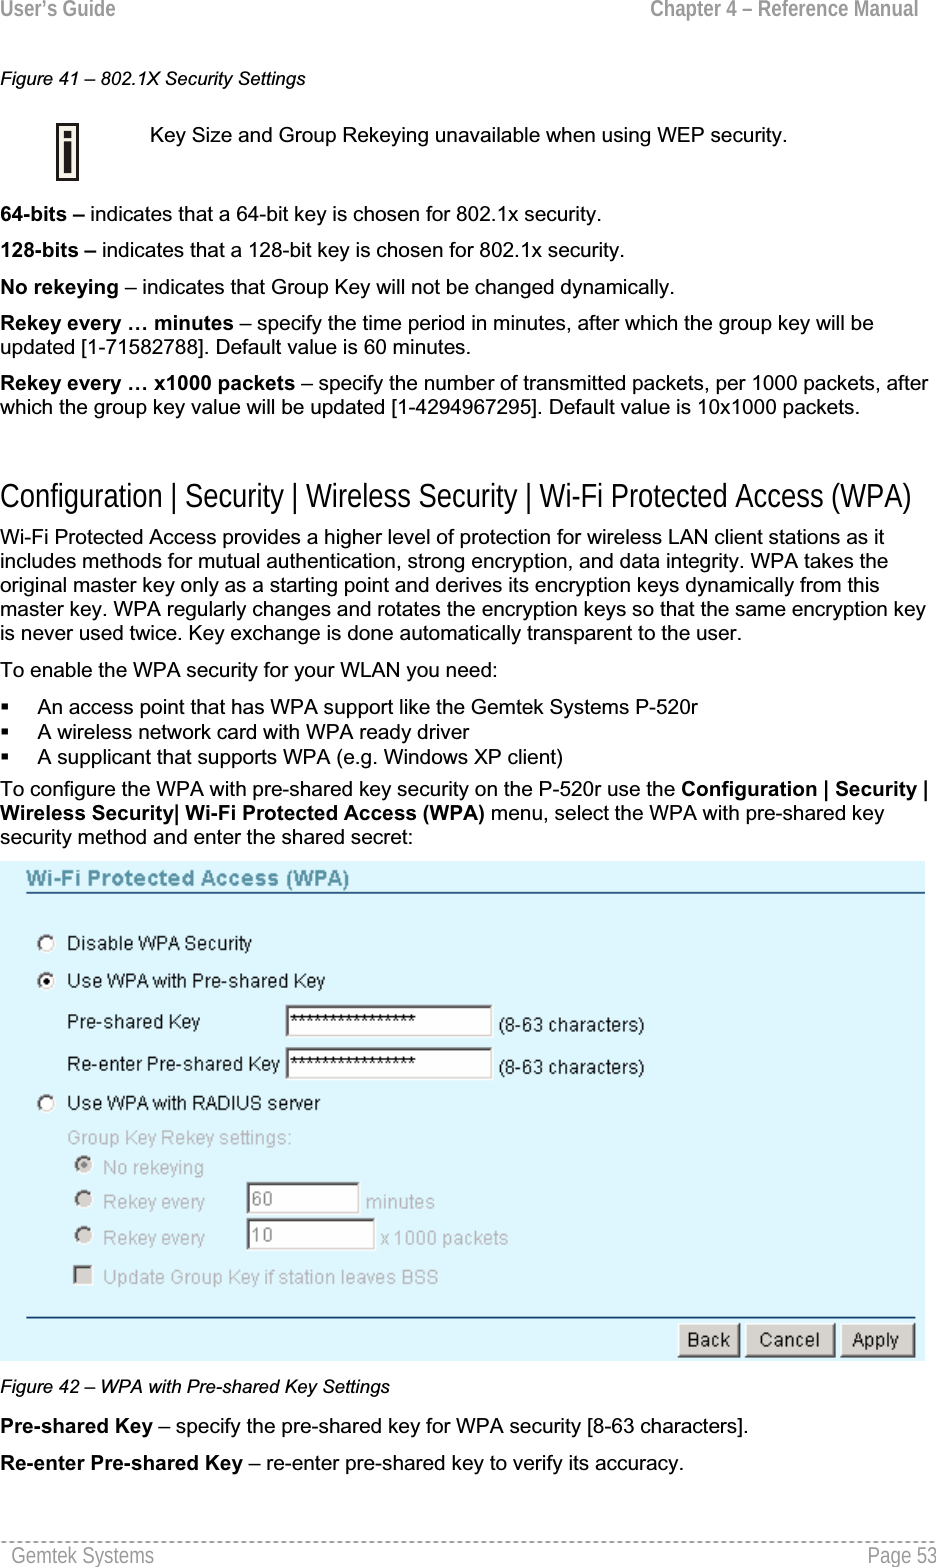 User’s Guide  Chapter 4 – Reference ManualFigure 41 – 802.1X Security SettingsKey Size and Group Rekeying unavailable when using WEP security.64-bits – indicates that a 64-bit key is chosen for 802.1x security. 128-bits – indicates that a 128-bit key is chosen for 802.1x security.No rekeying – indicates that Group Key will not be changed dynamically.Rekey every … minutes – specify the time period in minutes, after which the group key will beupdated [1-71582788]. Default value is 60 minutes.Rekey every … x1000 packets – specify the number of transmitted packets, per 1000 packets, after which the group key value will be updated [1-4294967295]. Default value is 10x1000 packets.Configuration | Security | Wireless Security | Wi-Fi Protected Access (WPA) Wi-Fi Protected Access provides a higher level of protection for wireless LAN client stations as it includes methods for mutual authentication, strong encryption, and data integrity. WPA takes theoriginal master key only as a starting point and derives its encryption keys dynamically from thismaster key. WPA regularly changes and rotates the encryption keys so that the same encryption key is never used twice. Key exchange is done automatically transparent to the user.To enable the WPA security for your WLAN you need:An access point that has WPA support like the Gemtek Systems P-520rA wireless network card with WPA ready driver A supplicant that supports WPA (e.g. Windows XP client)To configure the WPA with pre-shared key security on the P-520r use the Configuration | Security | Wireless Security| Wi-Fi Protected Access (WPA) menu, select the WPA with pre-shared keysecurity method and enter the shared secret:Figure 42 – WPA with Pre-shared Key SettingsPre-shared Key – specify the pre-shared key for WPA security [8-63 characters].Re-enter Pre-shared Key – re-enter pre-shared key to verify its accuracy. Gemtek Systems  Page 53